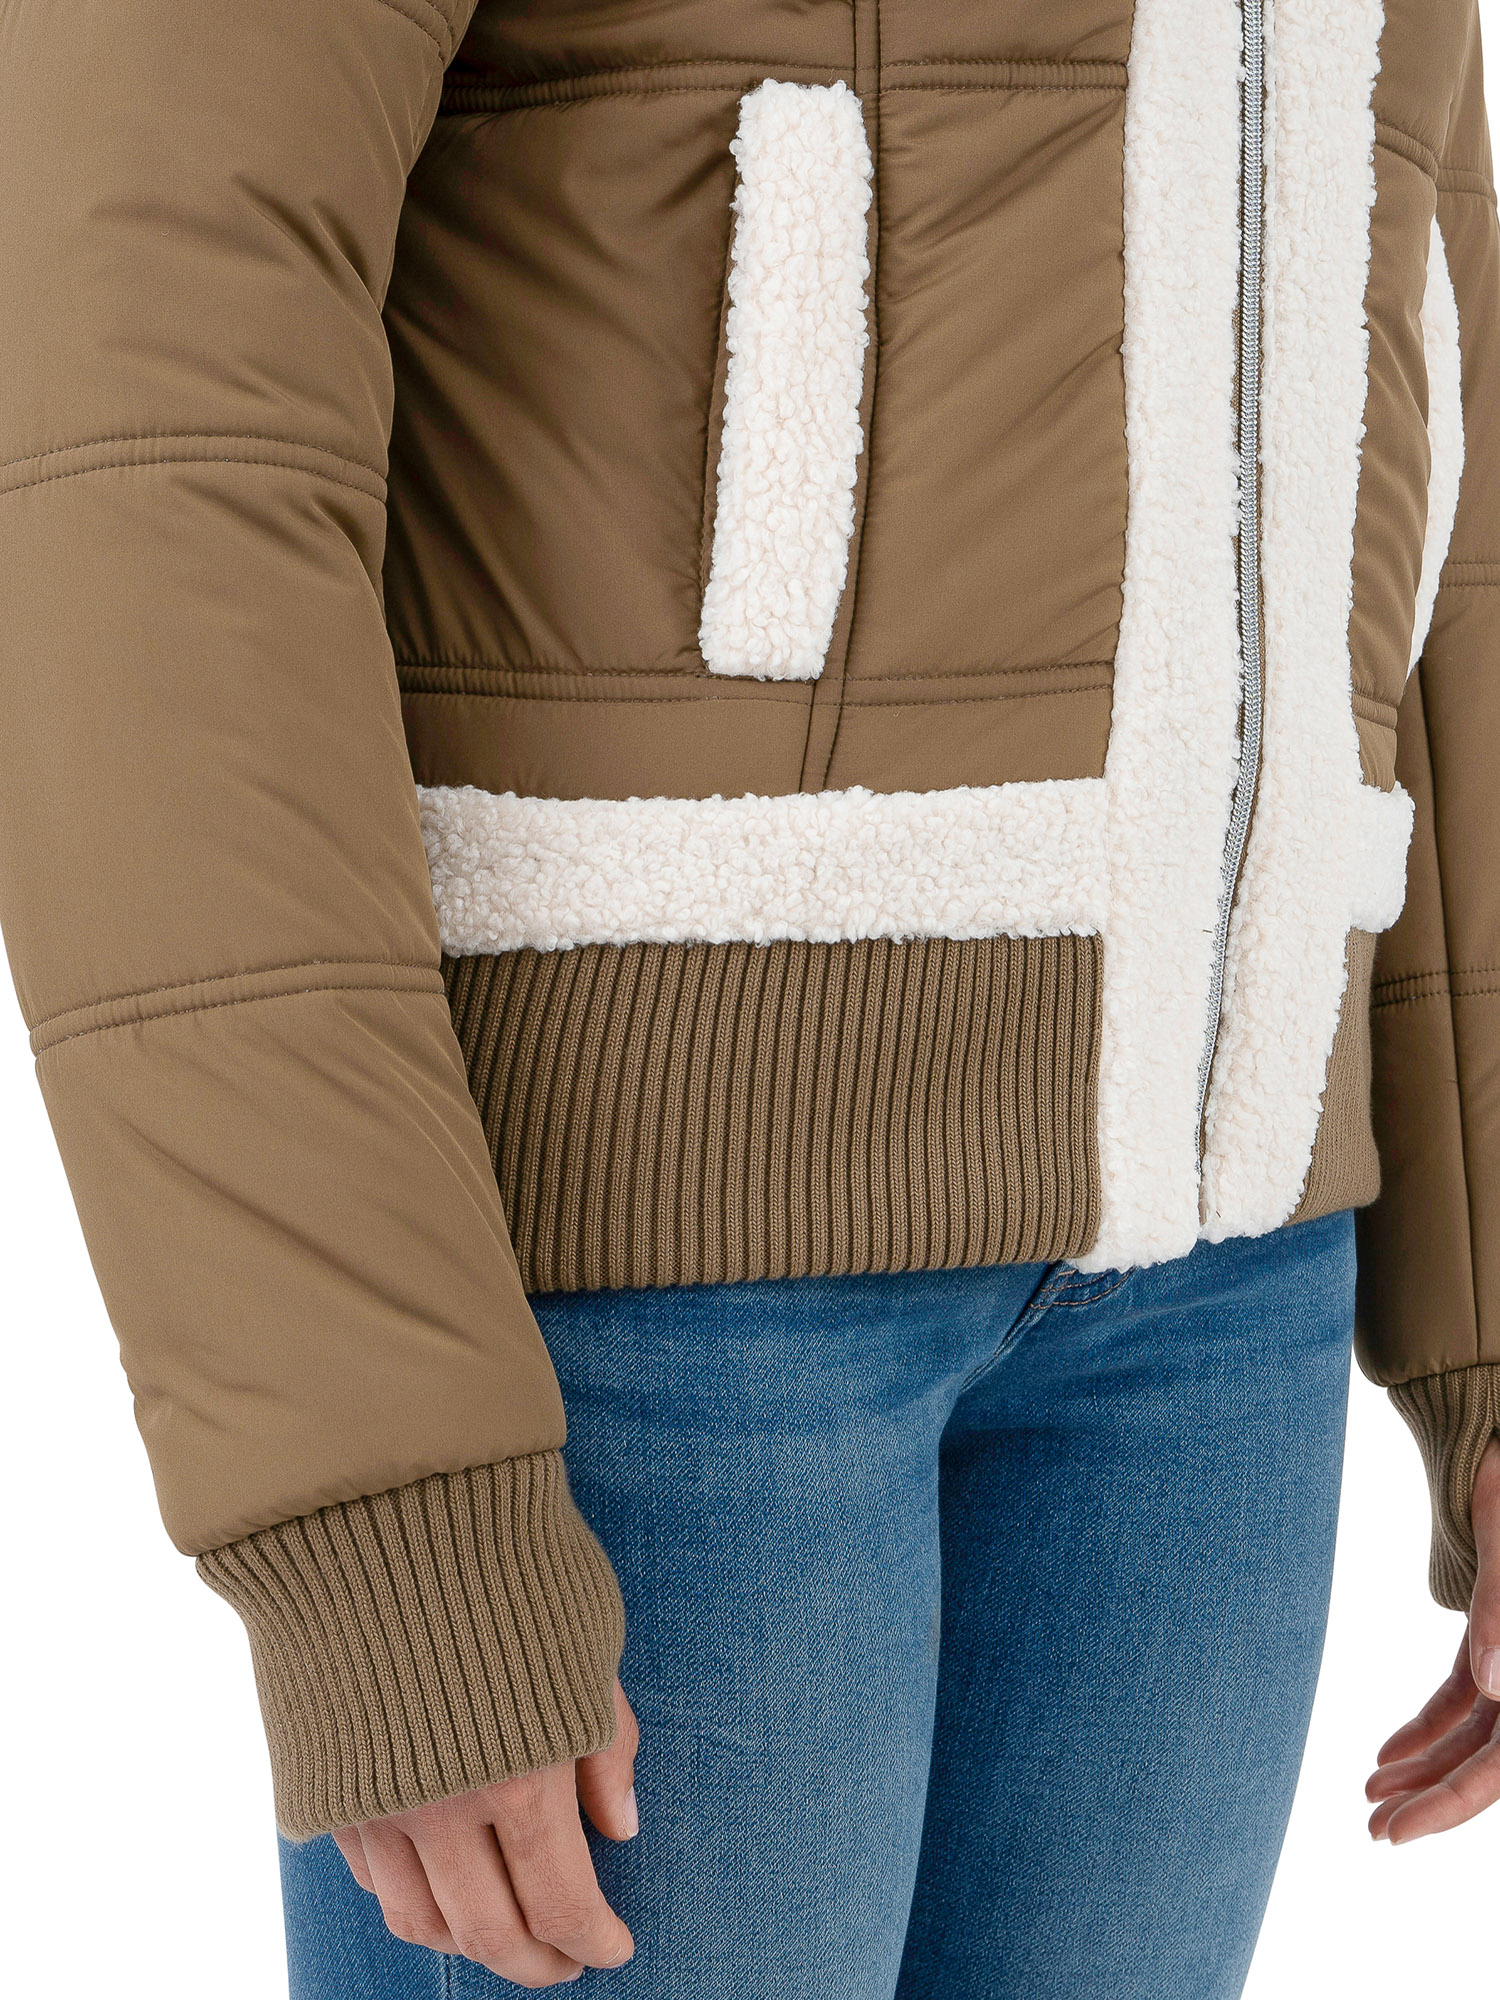 Cyn & Luca Women's Sustainable Bomber Jacket with Sherpa Trim - image 5 of 6